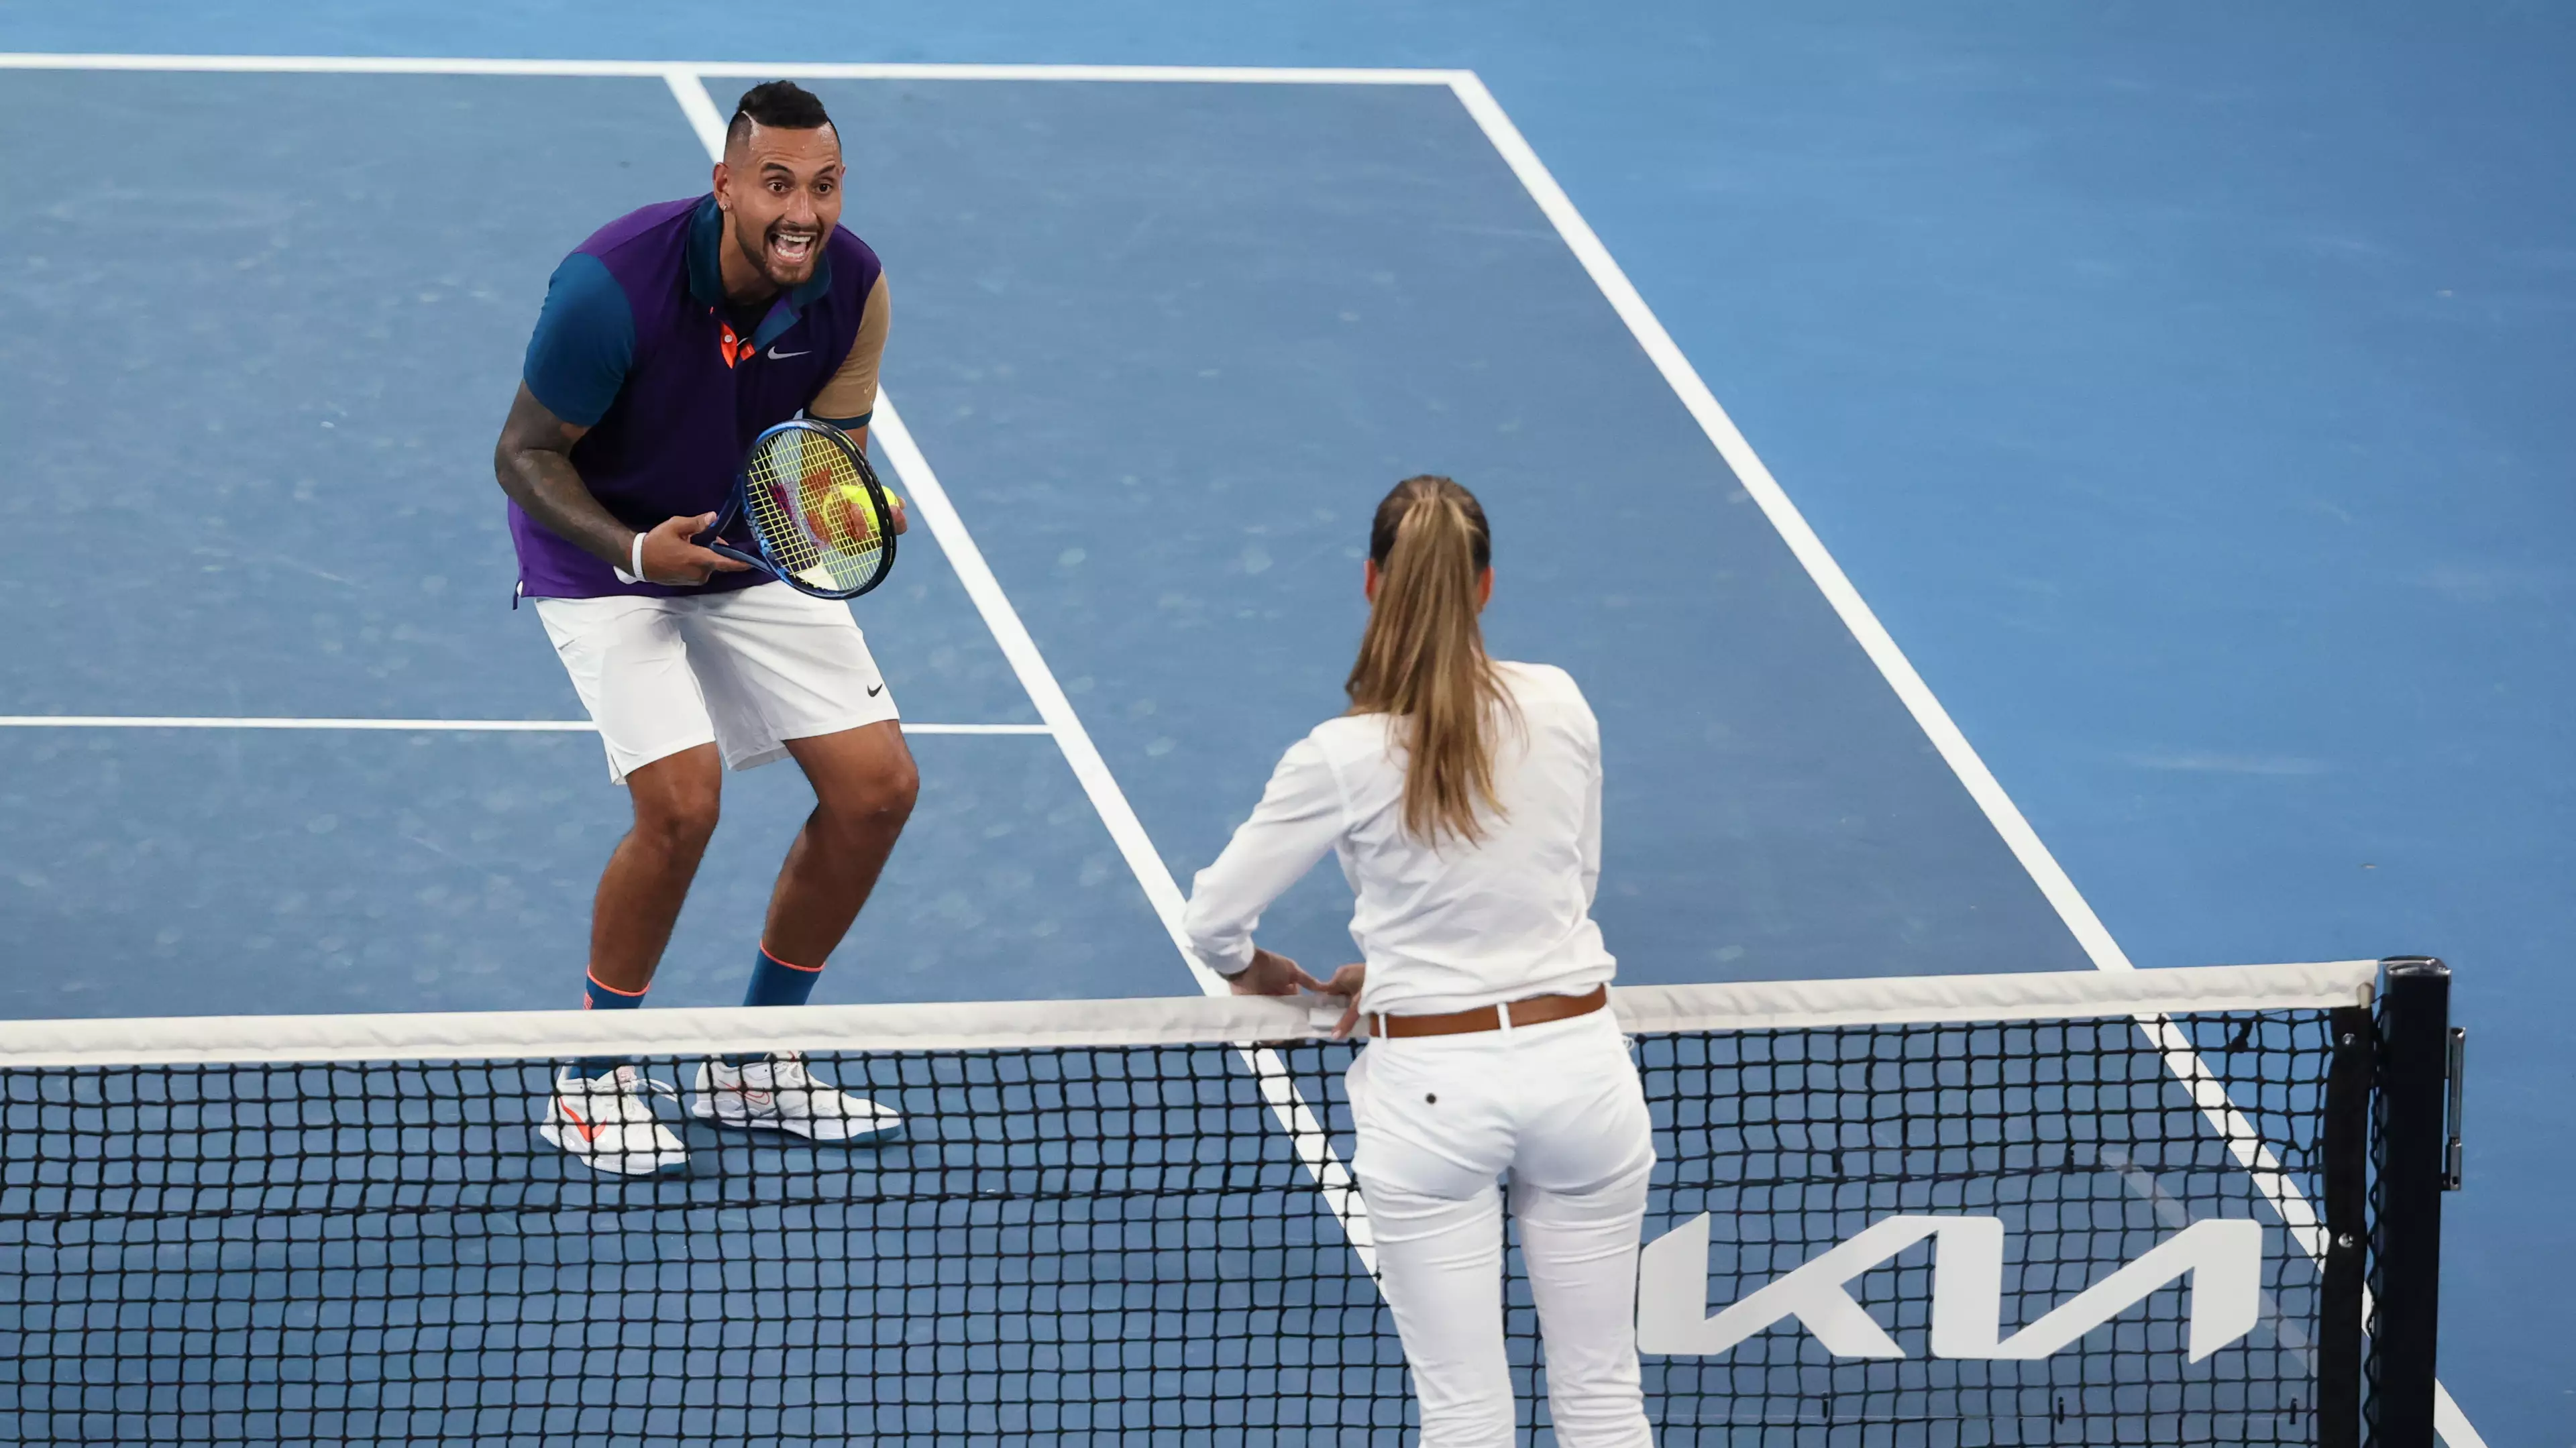 Nick Kyrgios Blows Up At Umpire After Net Technology Denies Him Two Aces In A Row